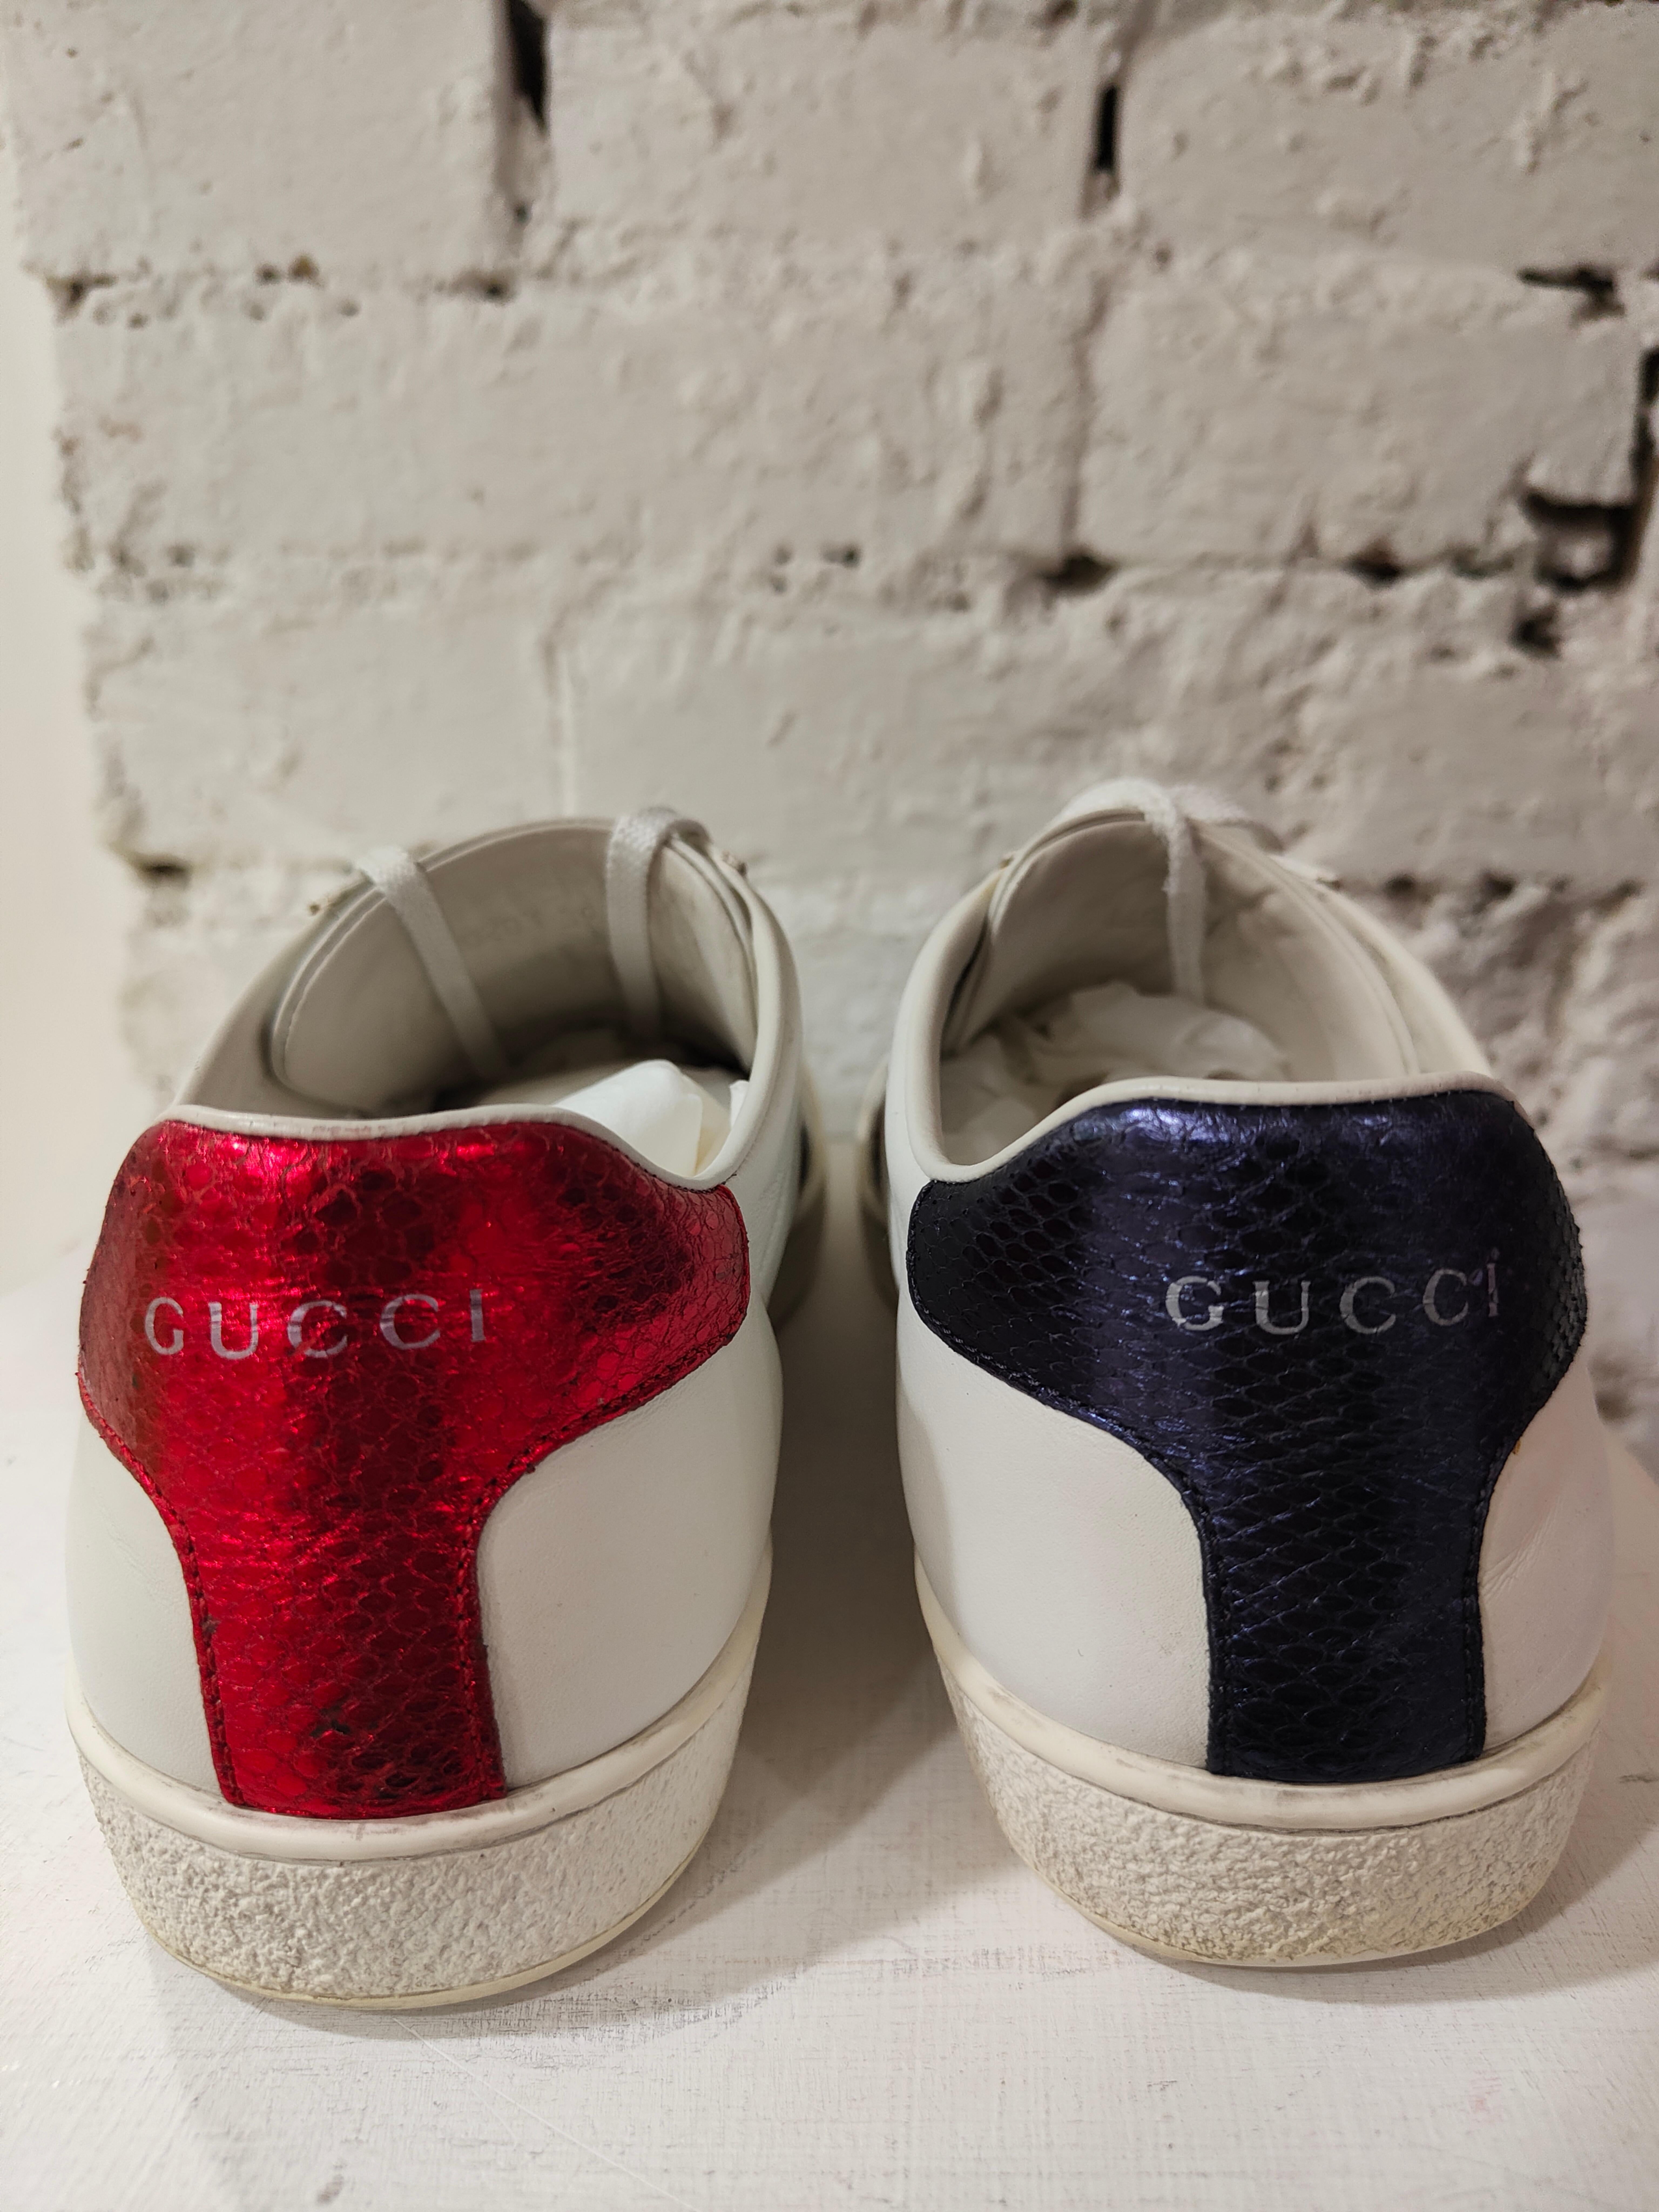 Gucci white leather red and blue patterns sneakers 
snakes with swarovski stones
totaqlly made in italy
size 39